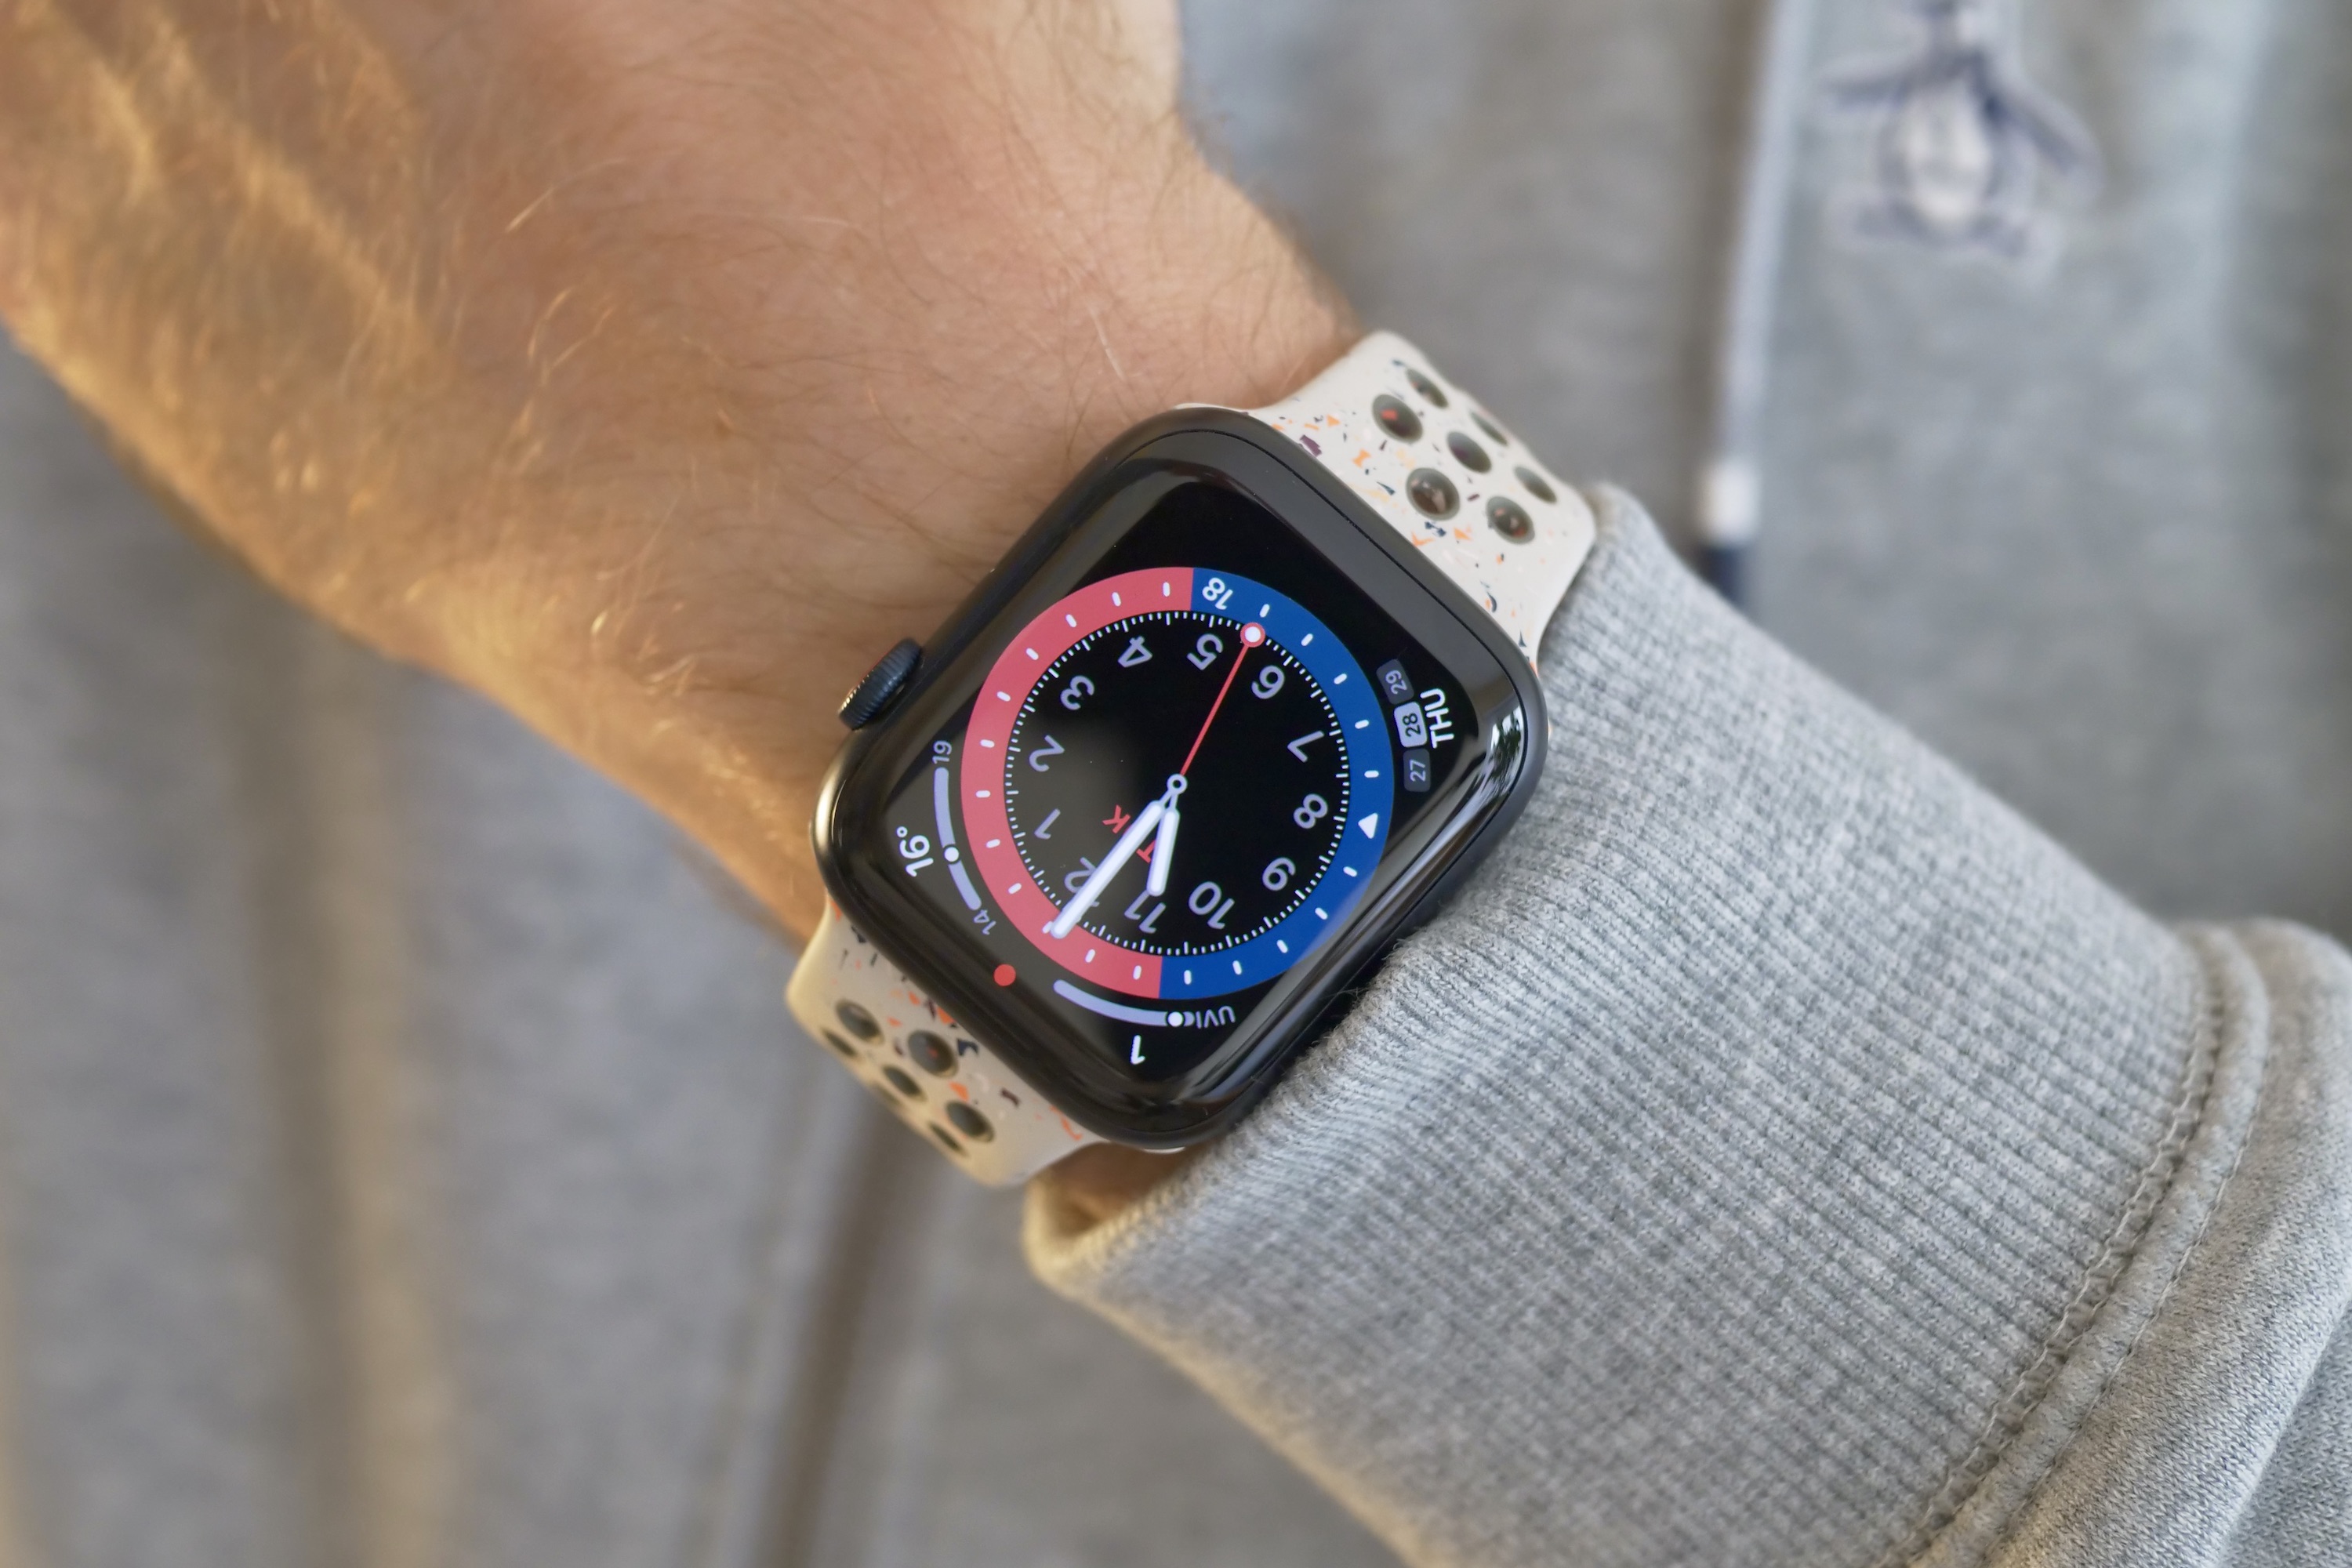 Apple is about to stop selling its latest Apple Watch models